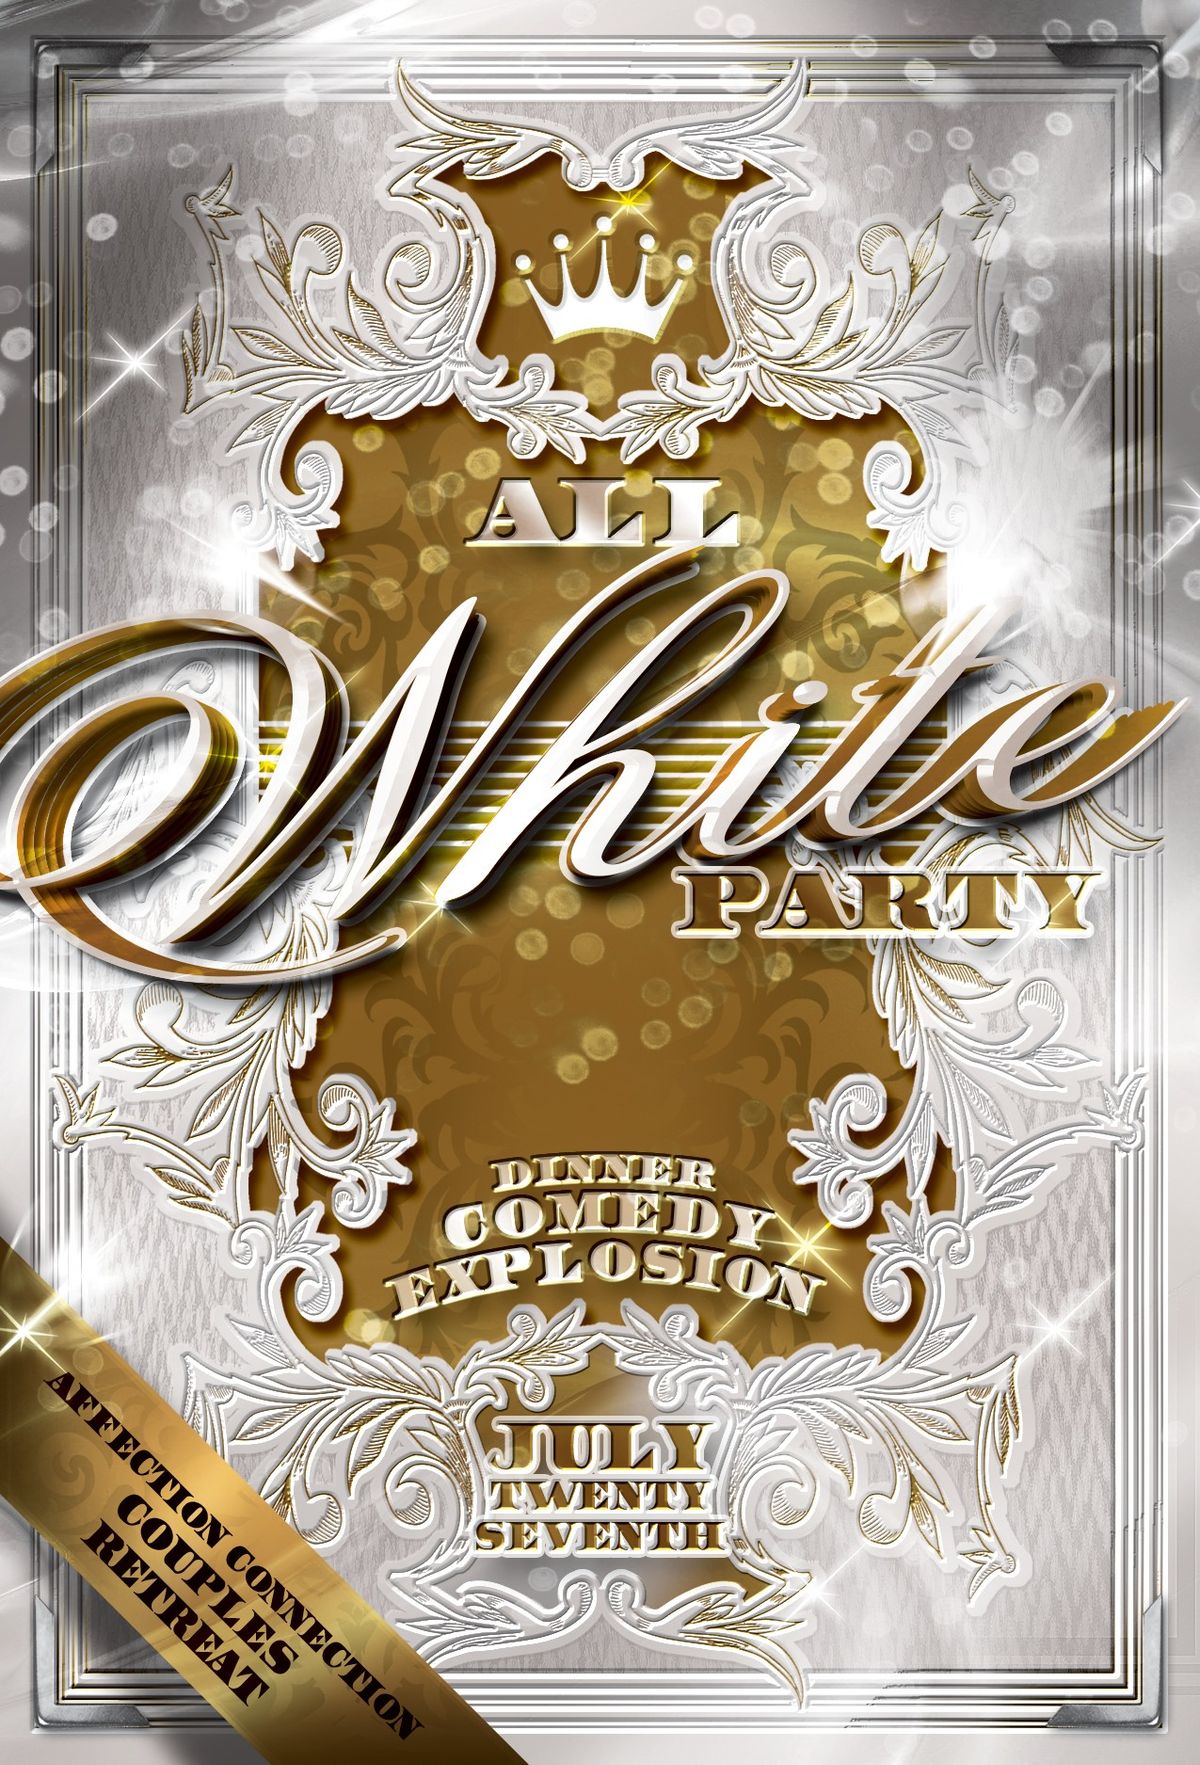 SAN ANTONIO | All White Affair Comedy Dinner Explosion & After Party